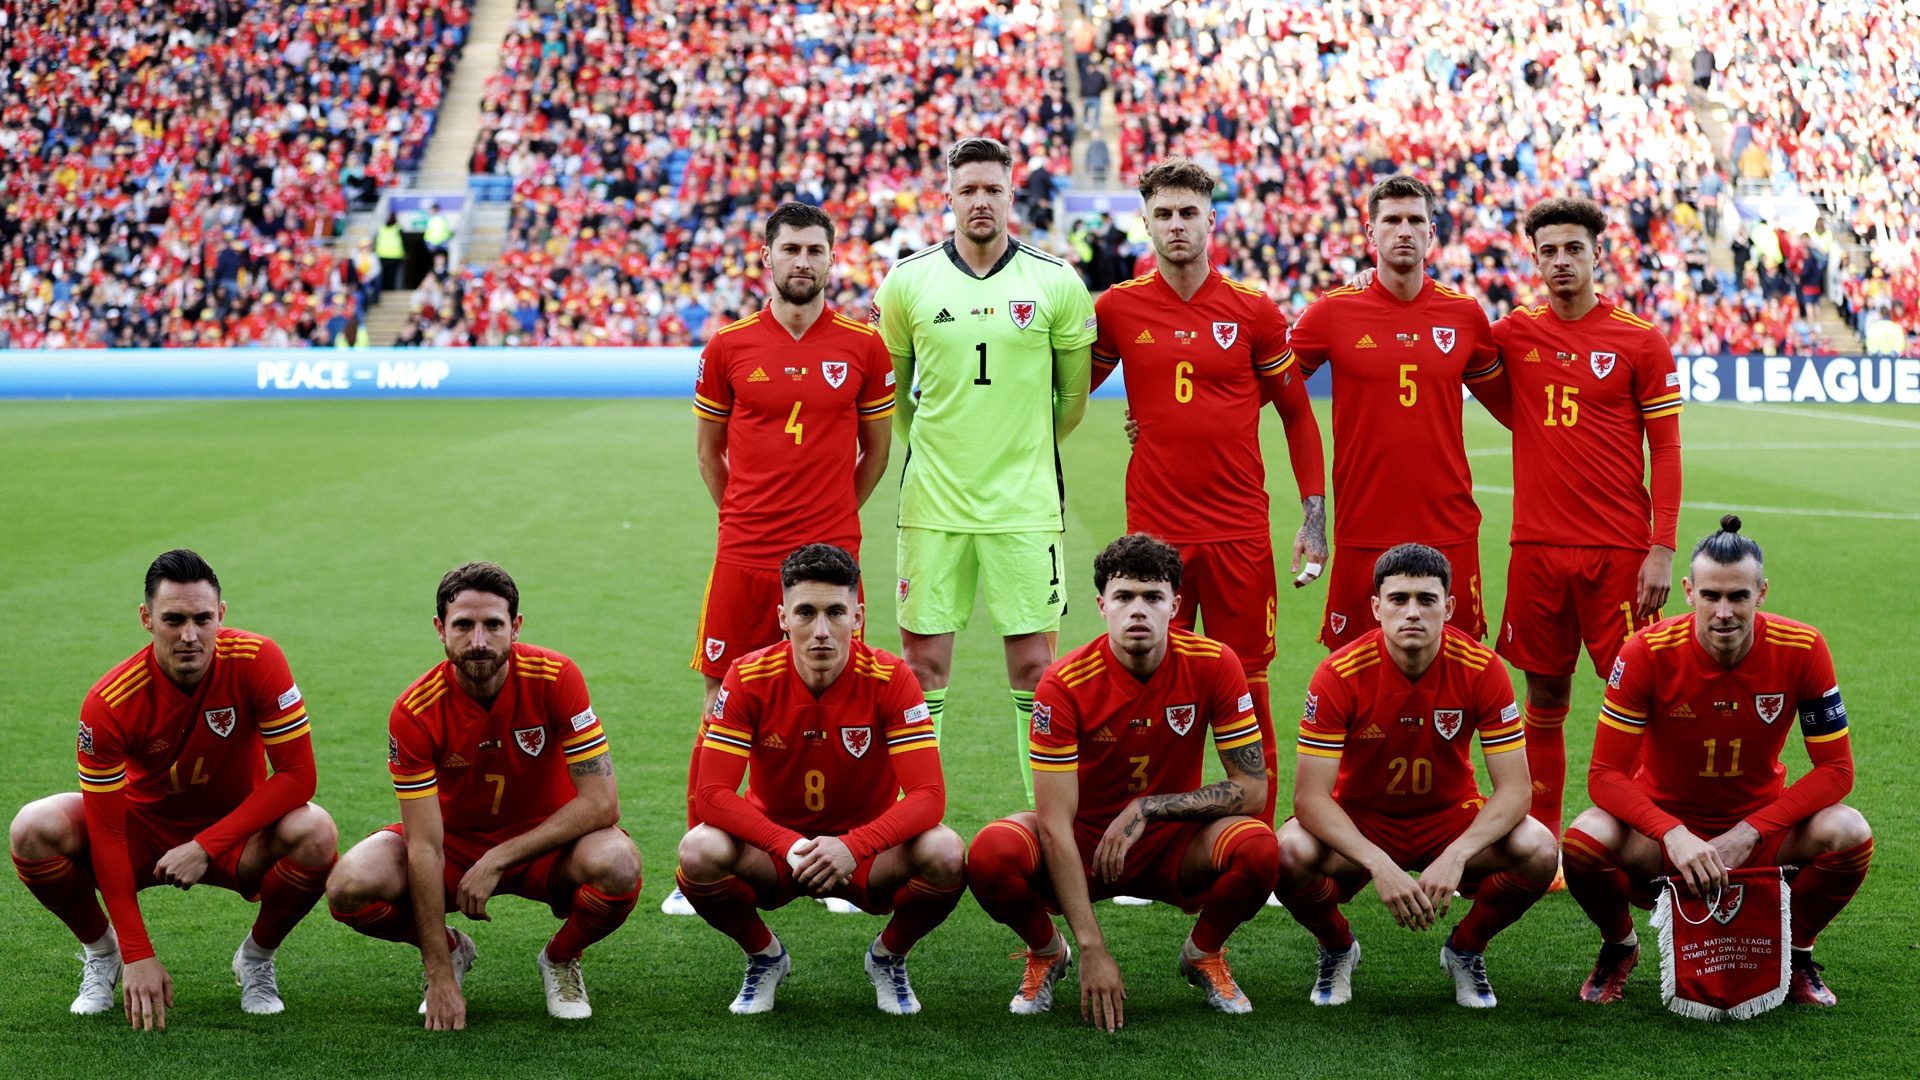 20220611_Wales_Players_Nations League v Belgium